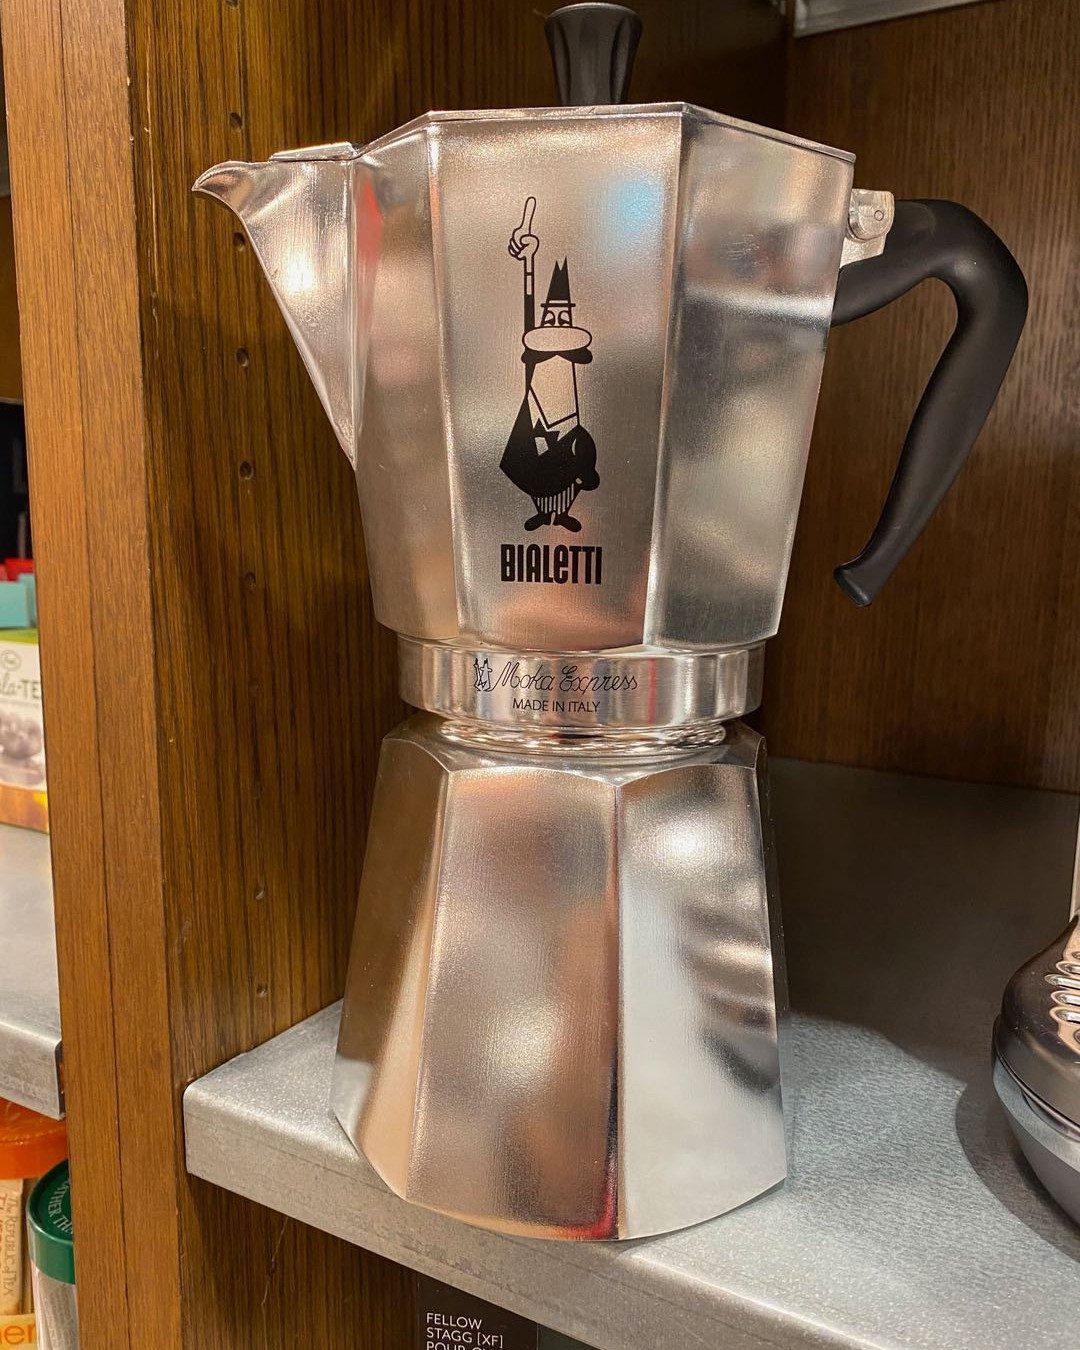 Just in 18 days and I will savor the beautiful taste of coffee.​​​​​​​​
I think this 12 cups espresso coffee maker will suffice for me, don't you think?​​​​​​​​
@bialettiofficial I miss you so <3 ​​​​​​​​
​​​​​​​​
☕️ ❤️☕️❤️☕️❤️☕️❤️☕️❤️☕️❤️☕️❤️☕️​​​​​​​​
.​​​​​​​​
.​​​​​​​​
.​​​​​​​​
.​​​​​​​​
. #lent #lovecoffee #coffeelover #giangiskitchen #giangitownsend